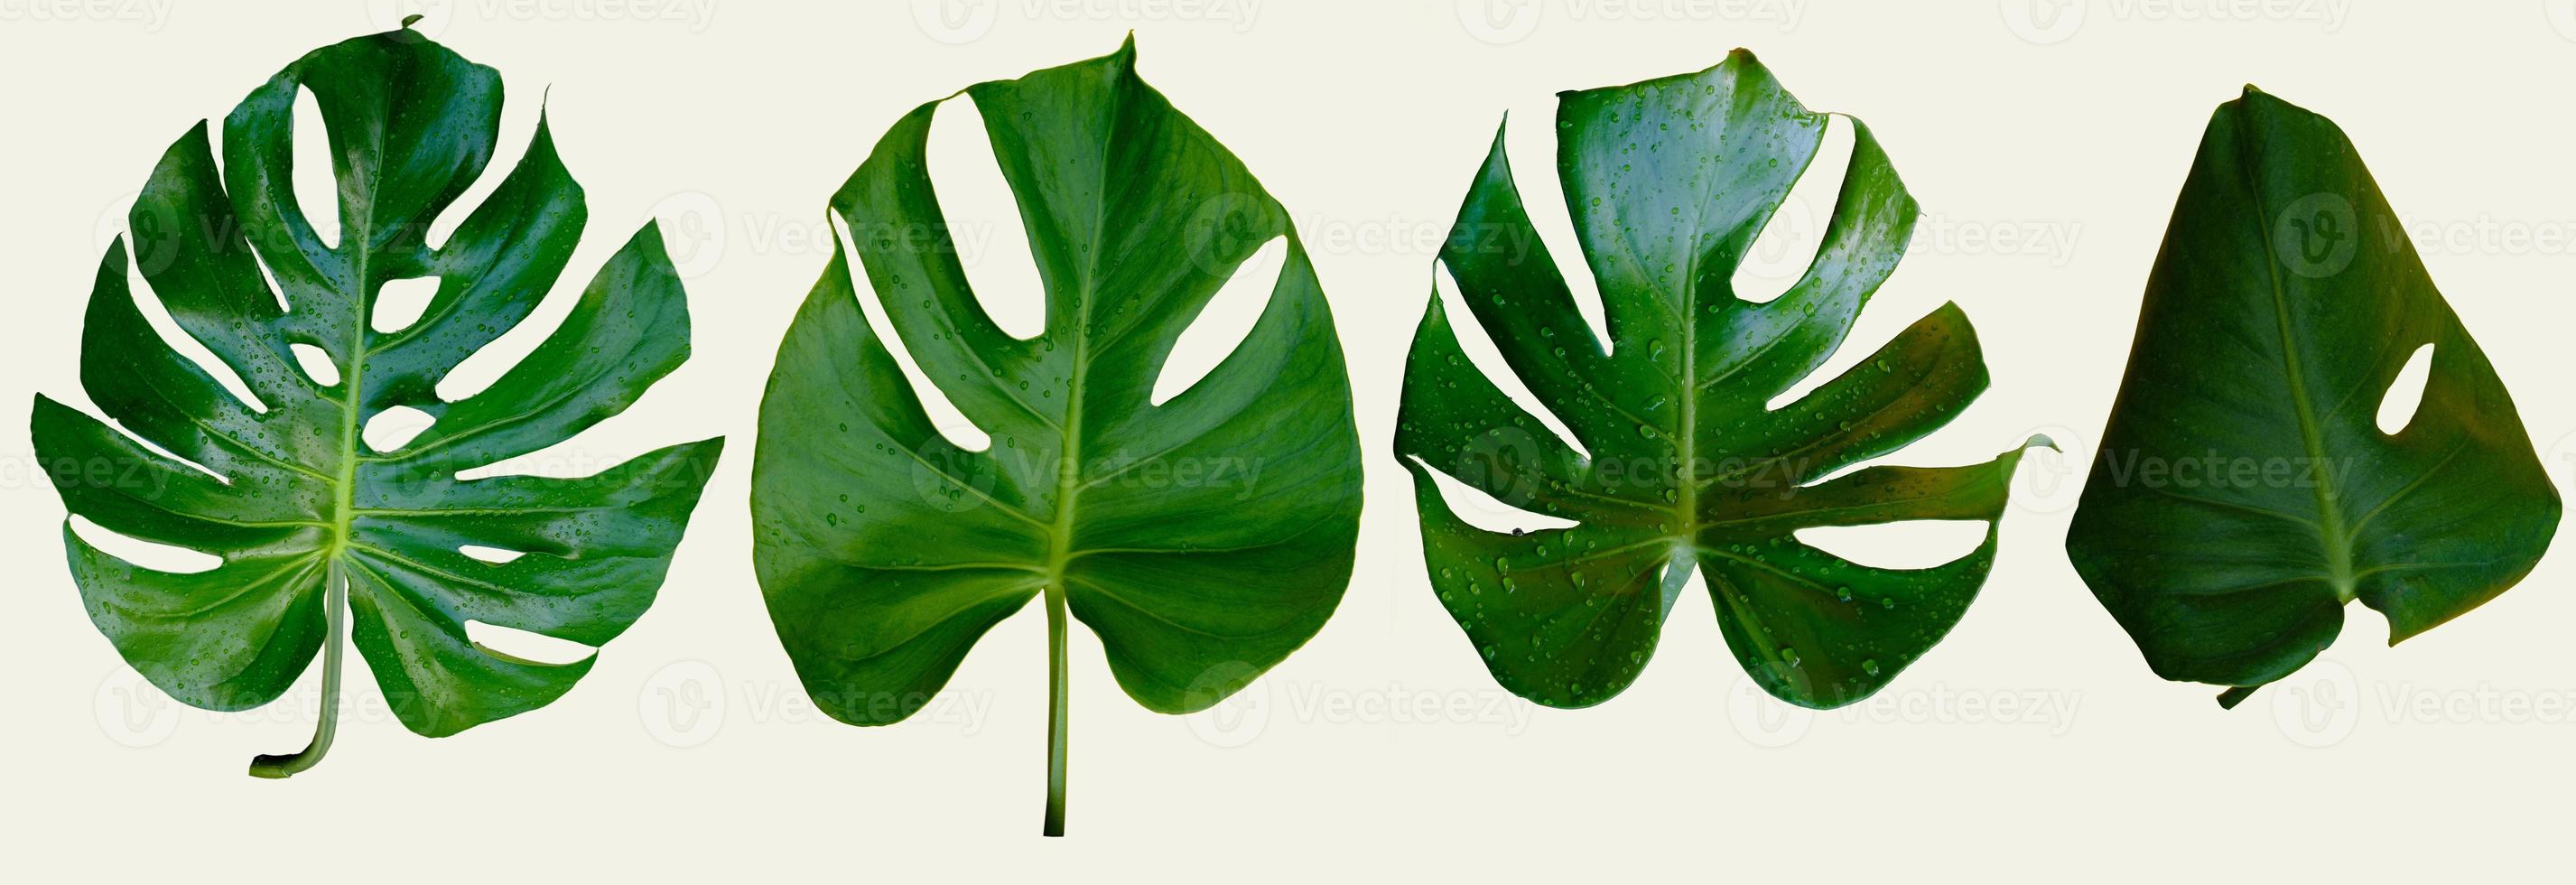 Monstera plant leaves isolated on grey background photo